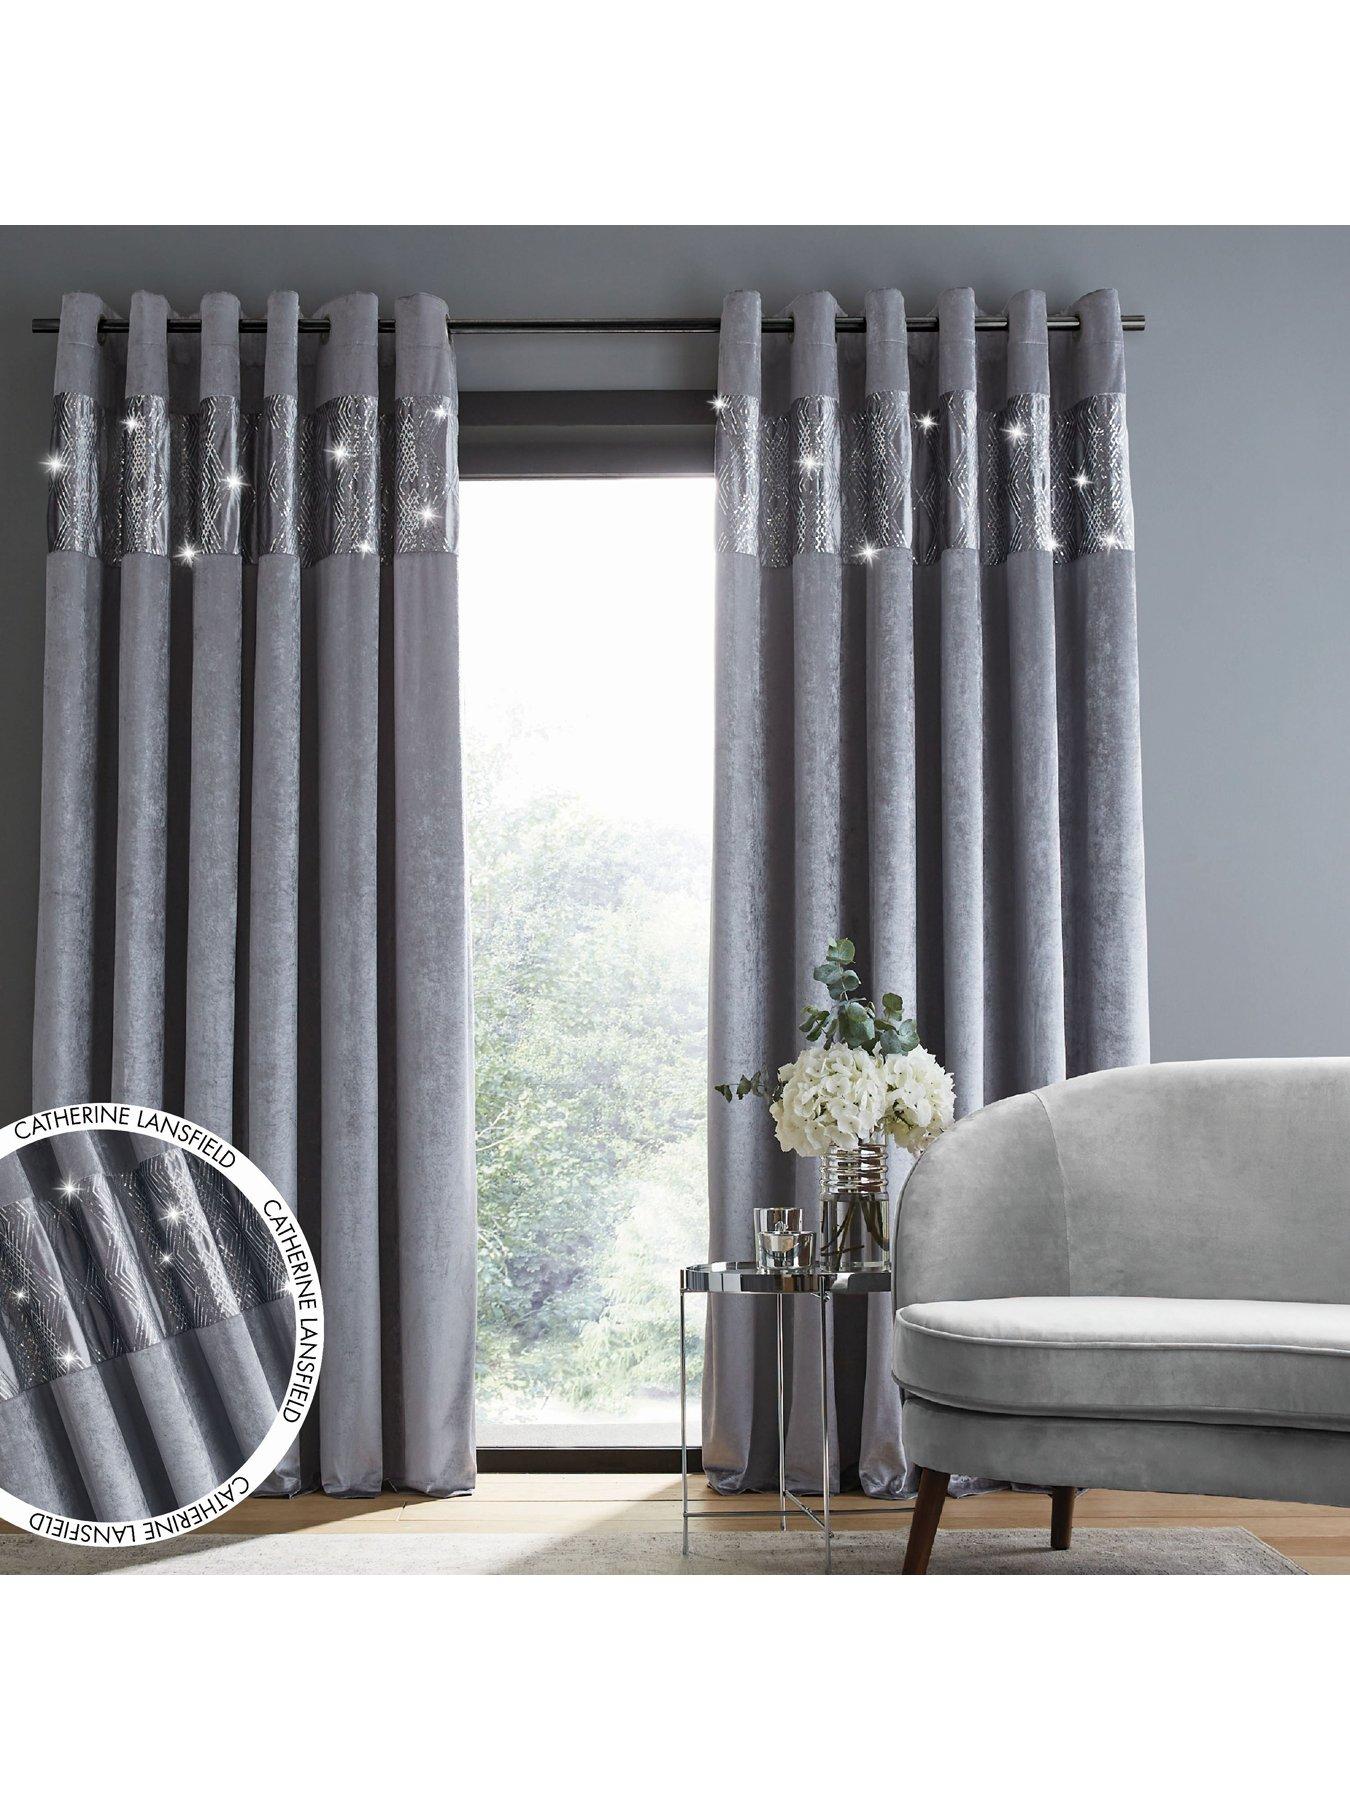 Catherine Lansfield Fully Lined Glitzy Glamour Silky Sheen Eyelet Curtains Grey 